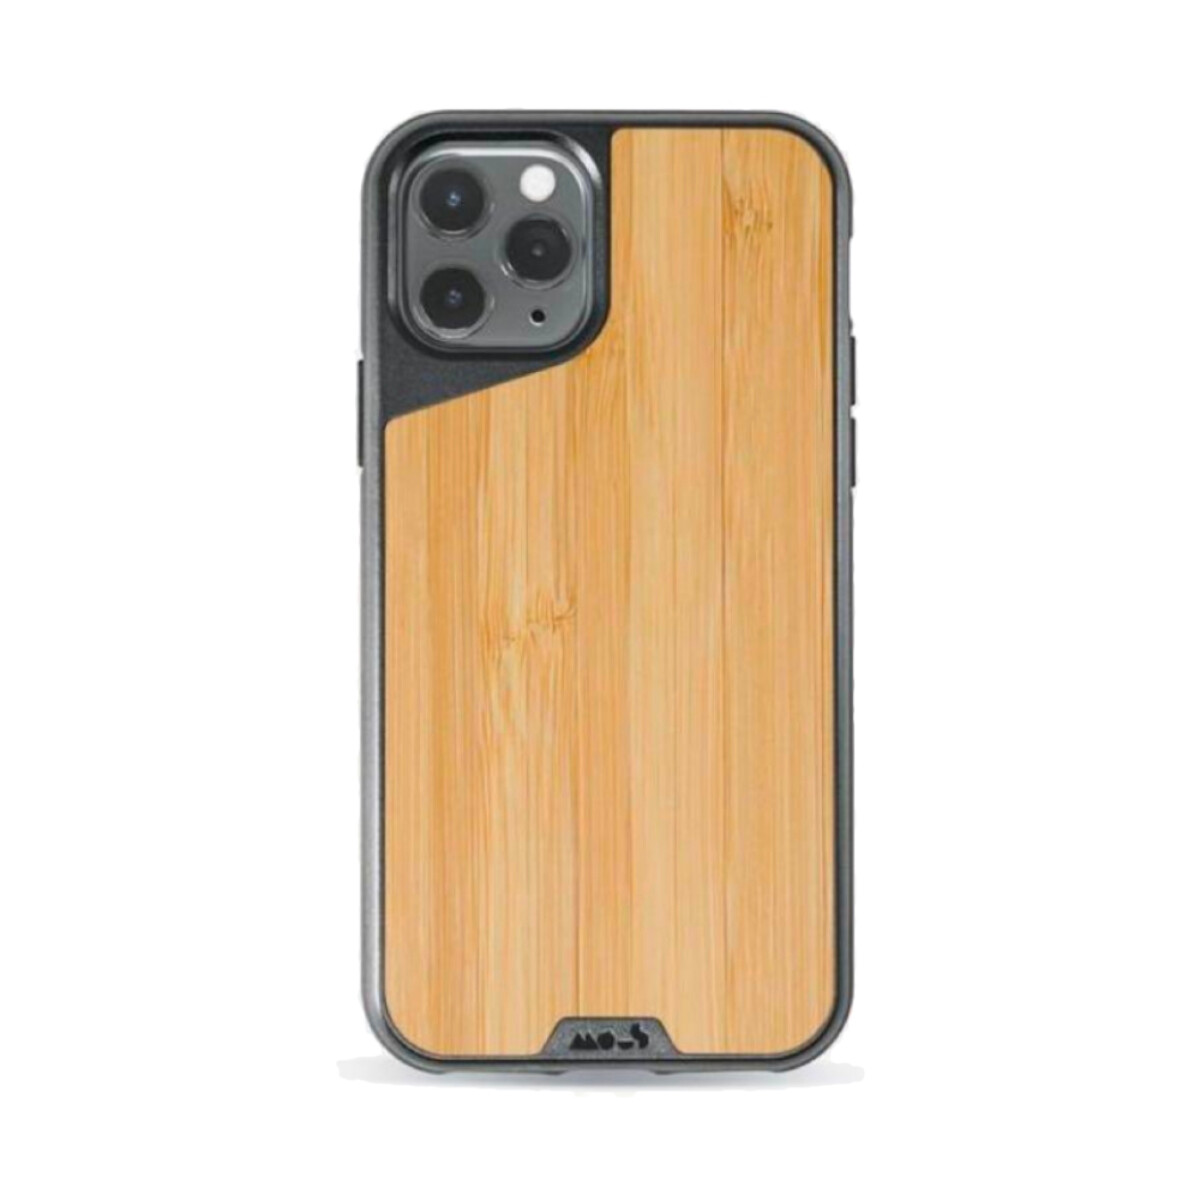 Mous case limitless 3.0 iphone 12 mini - Bamboo 